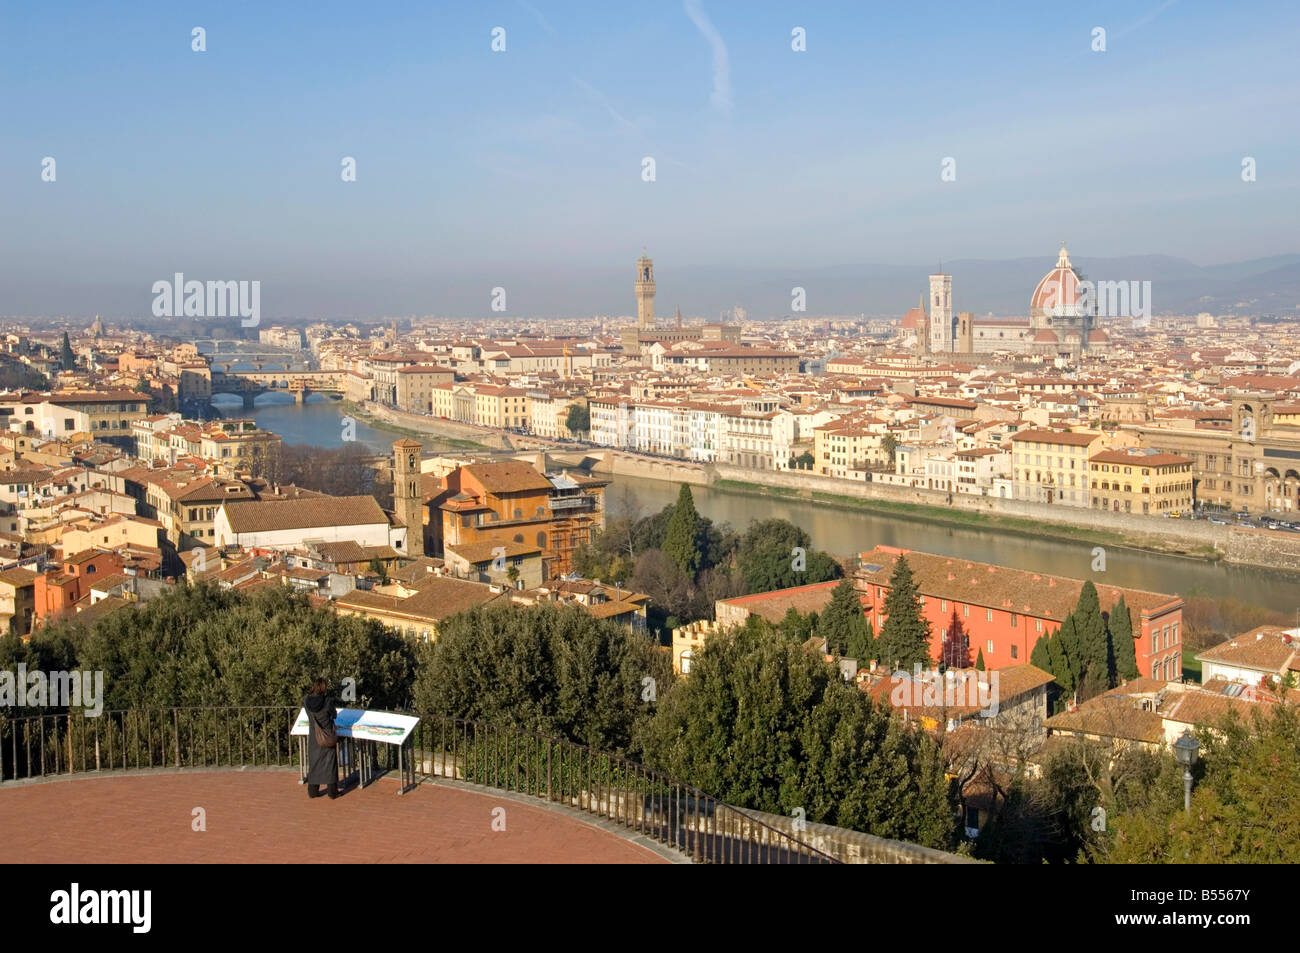 A wide cityscape view of Florence with a tourist in the forground at the Piazzale Michelangelo viewing area. Stock Photo